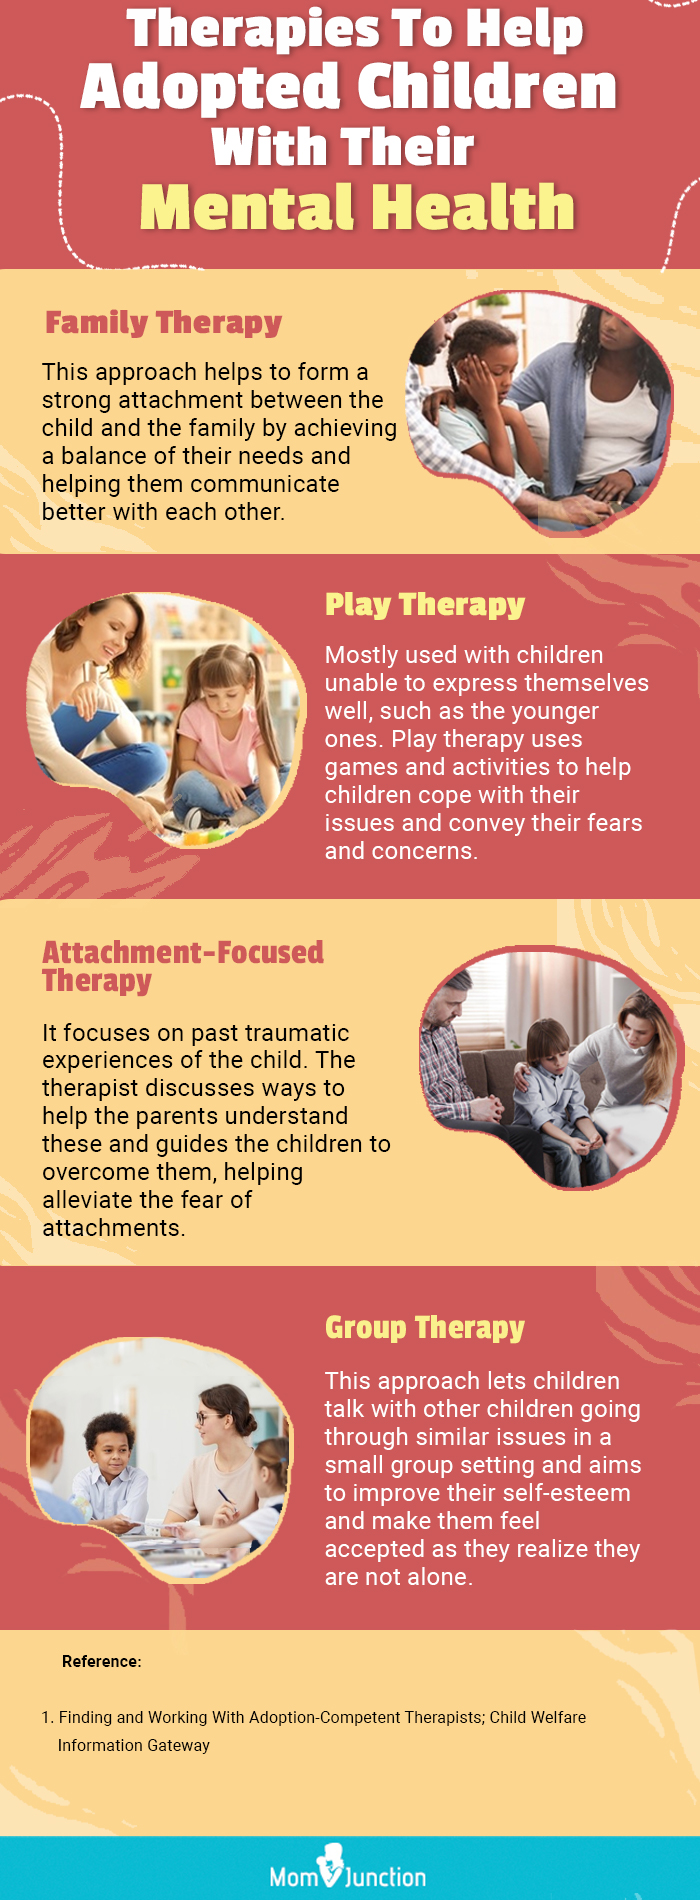 therapies to help adopted children with their mental health [infographic]